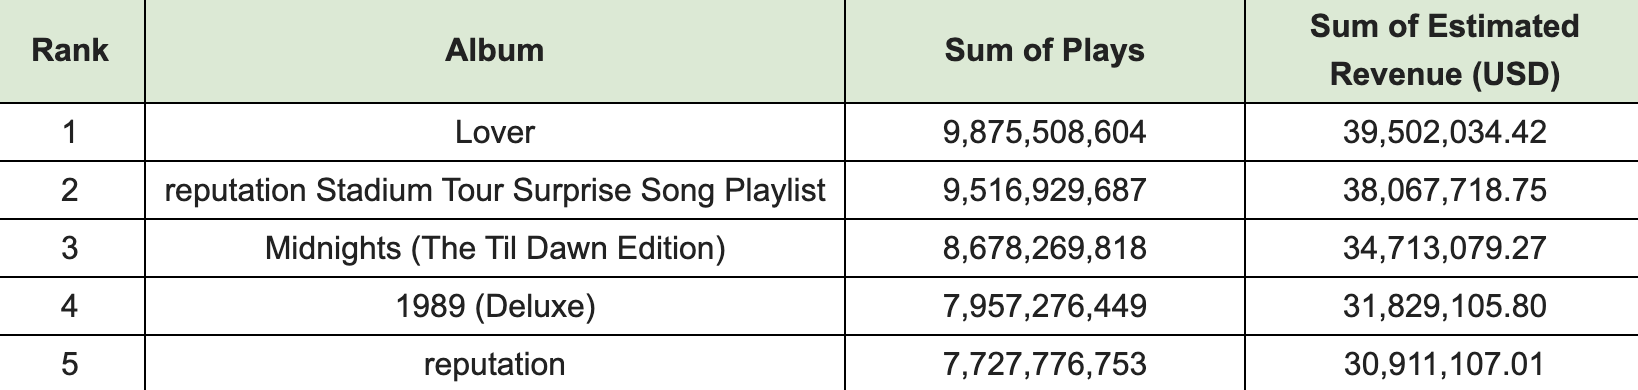 Taylor_Swifts_top_5_most_streamed_albums_in_order_of_streams_and_revenue.png